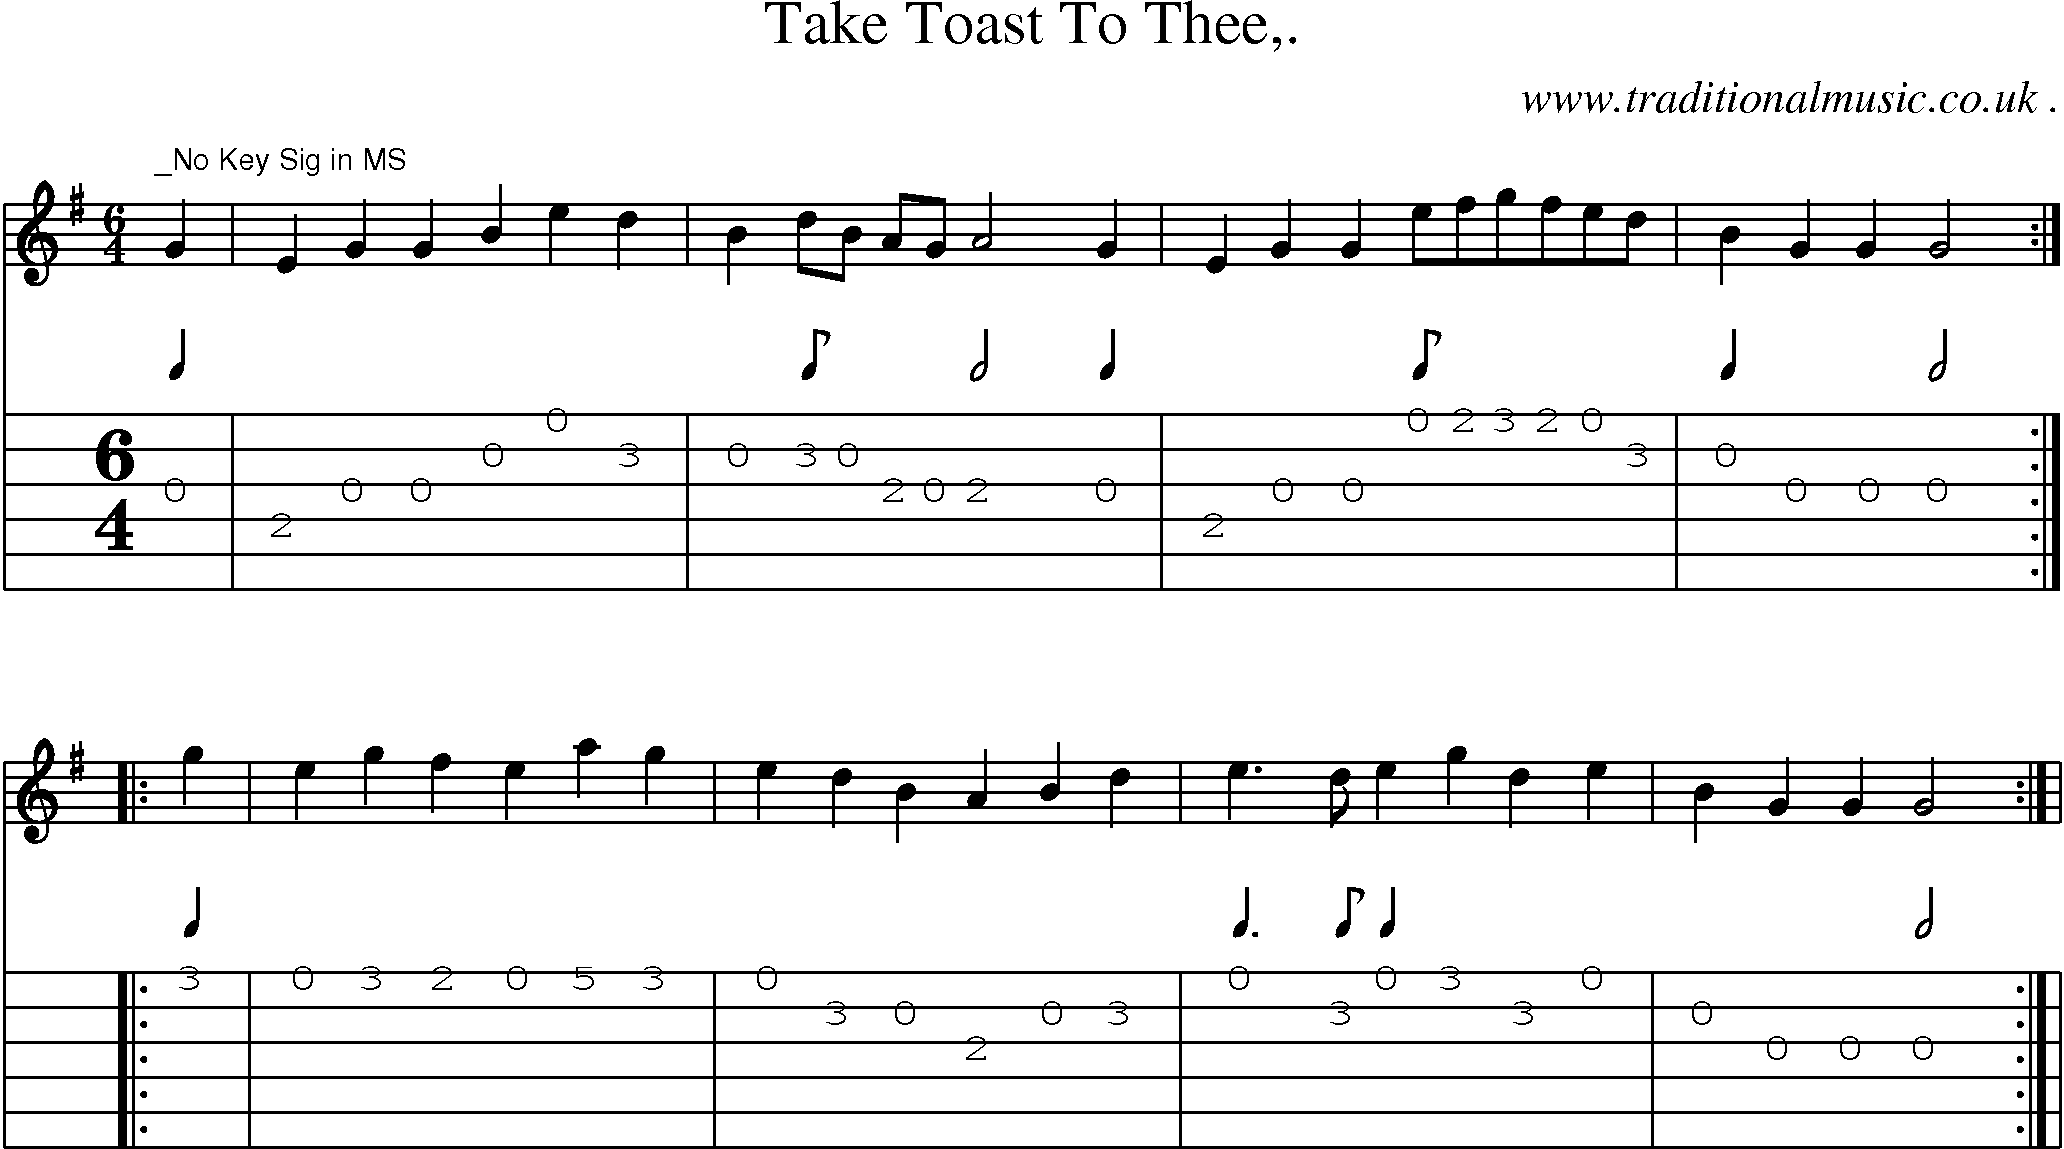 Sheet-Music and Guitar Tabs for Take Toast To Thee